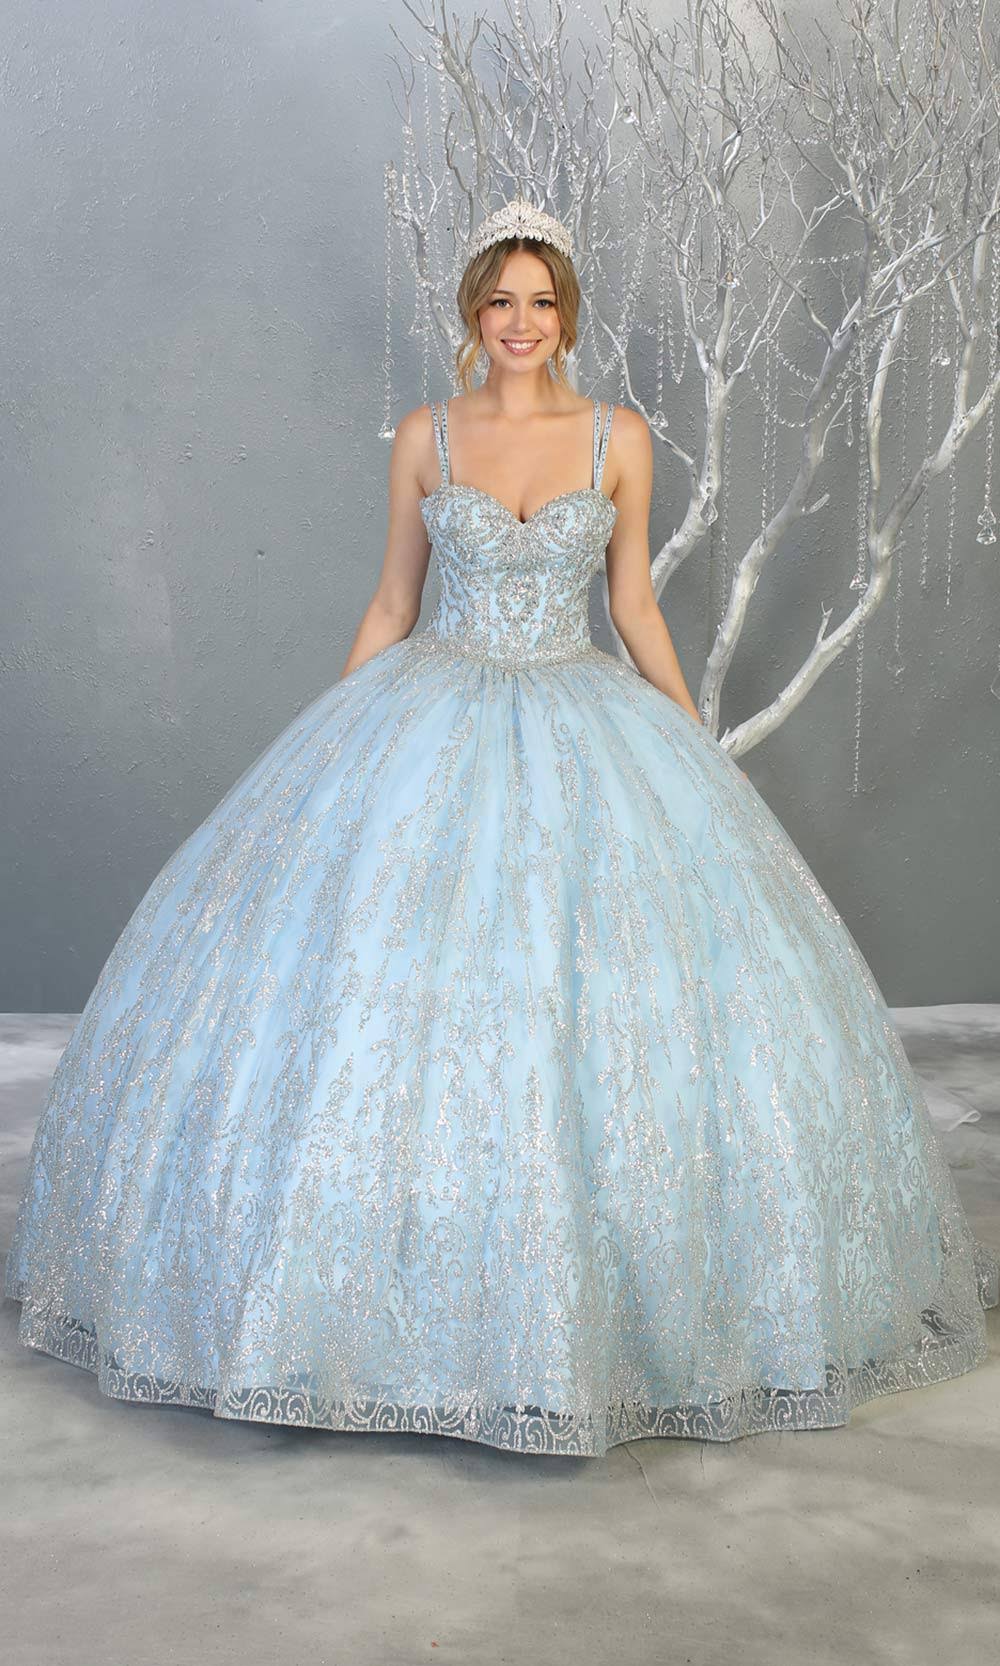 Mayqueen LK145 baby blue quinceanera ball gown w/glittery skirt & beaded top. This light blue ball gown is perfect for engagement dress, wedding reception, indowestern party gown, sweet 16, debut, sweet 15, sweet 18. Plus sizes available for ballgowns